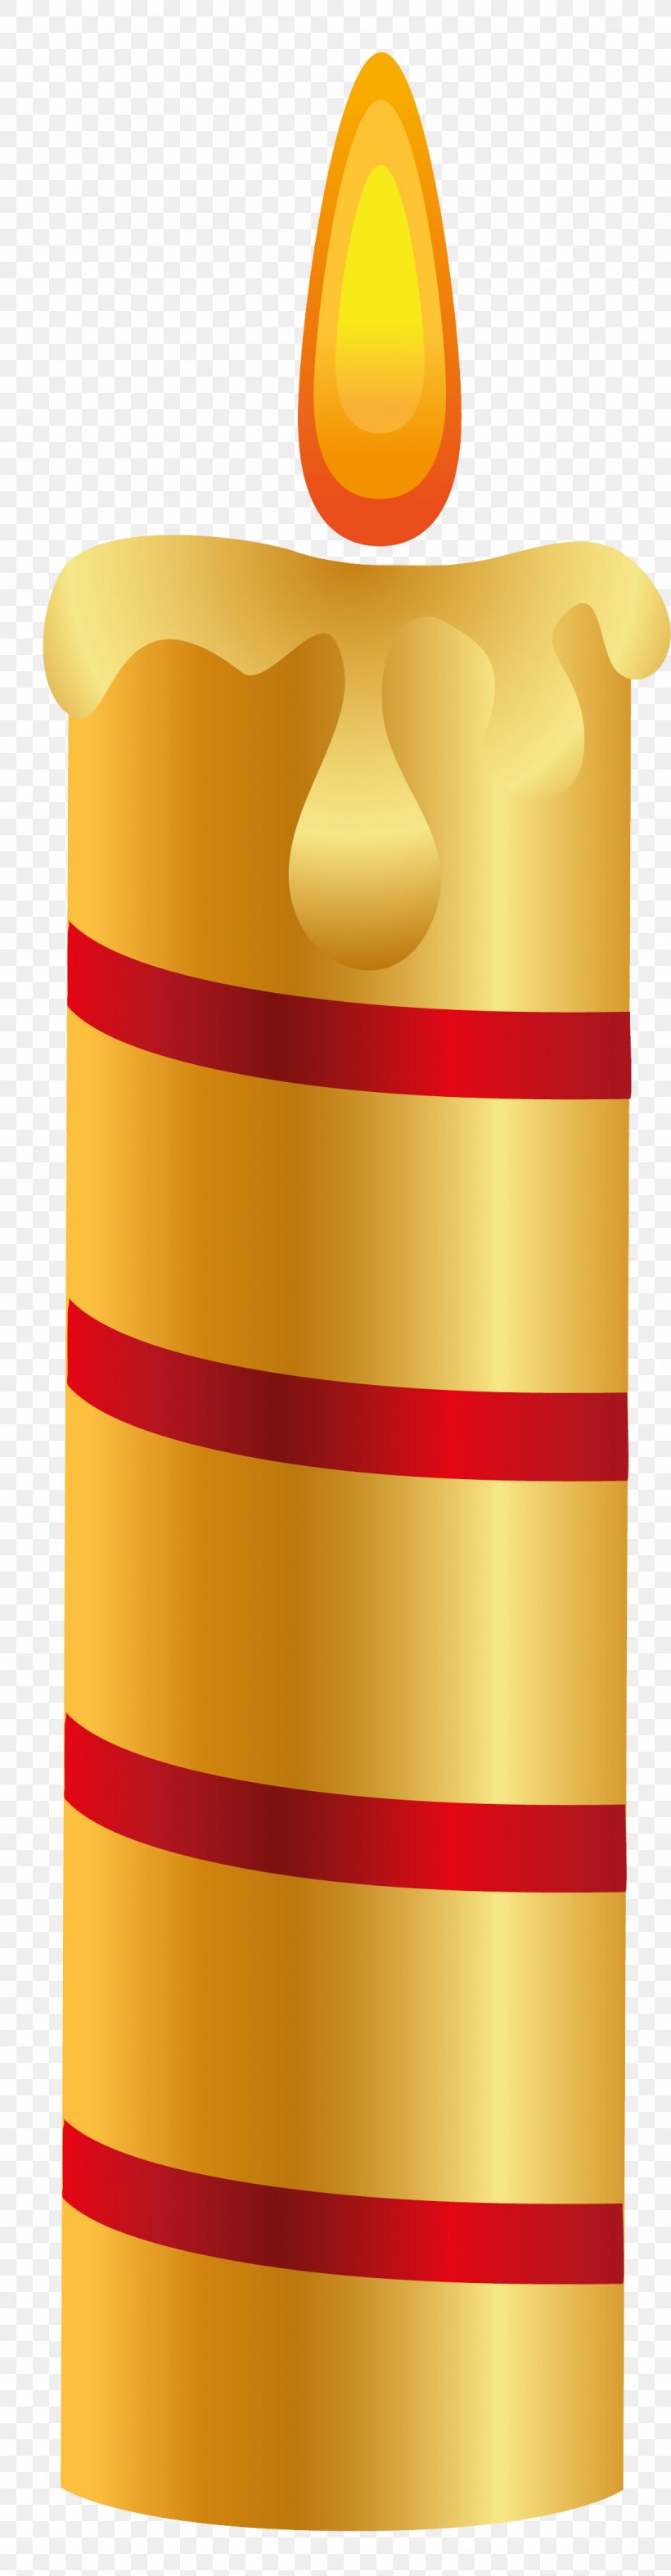 Candle Design Yellow Flame Image, PNG, 1097x4211px, Candle, Color, Cylinder, Designer, Fire Download Free